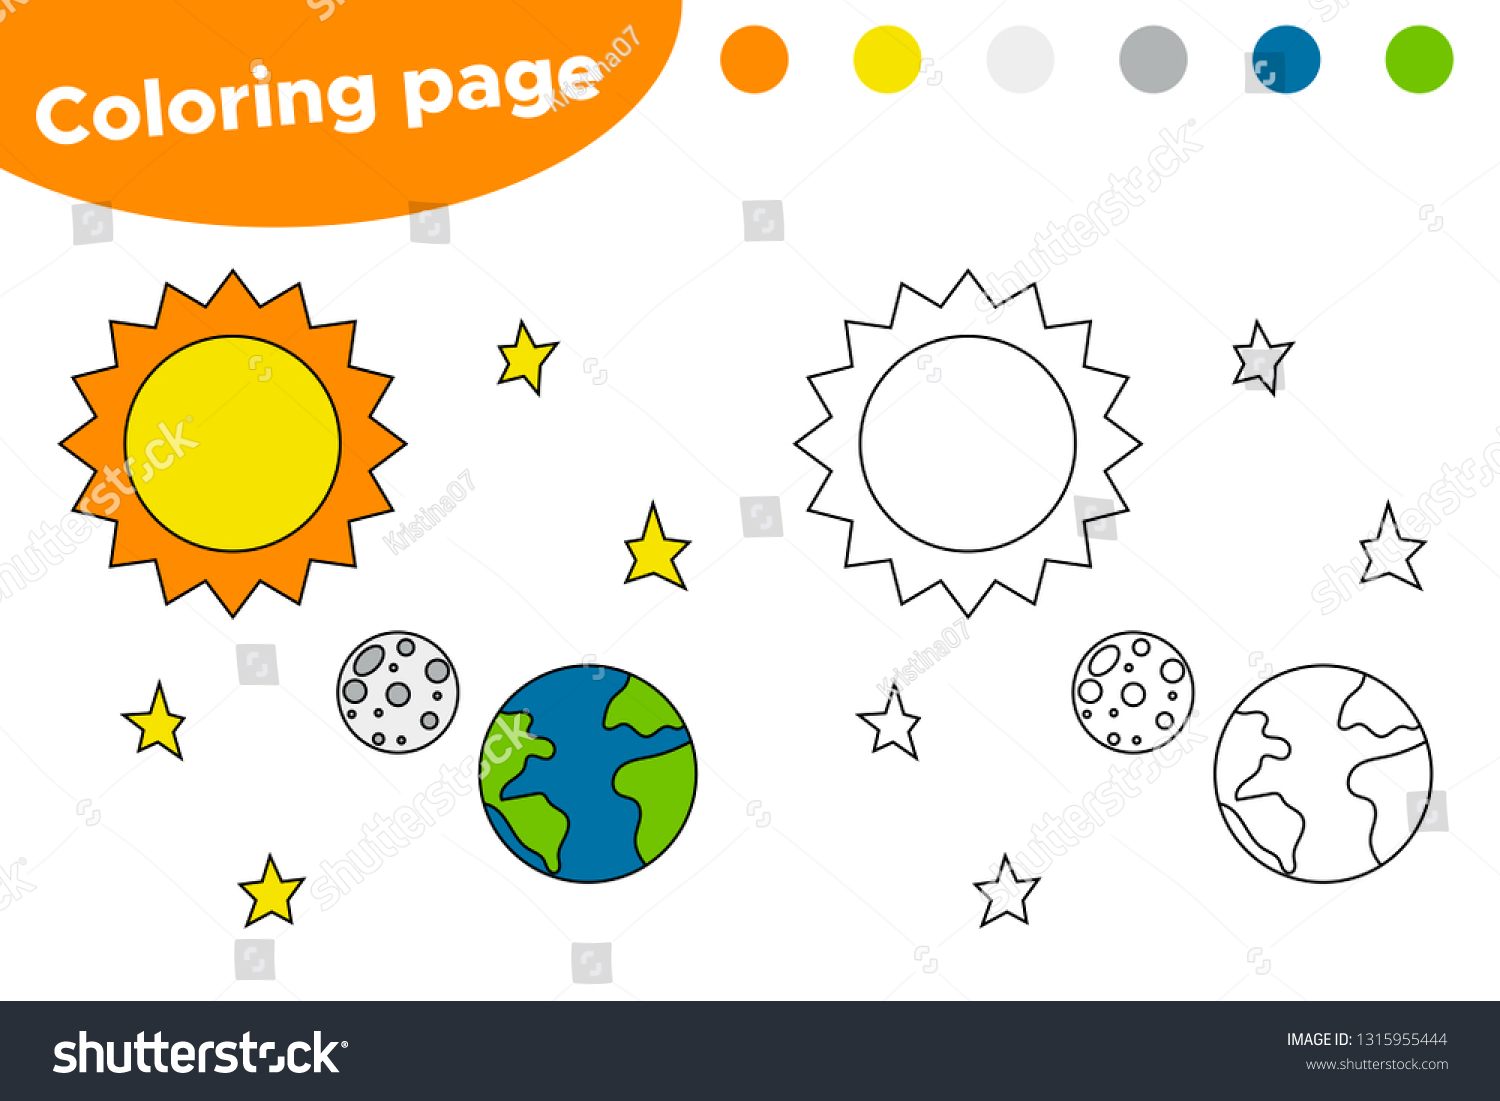 Printable coloring page solar system cartoon stock vector royalty free